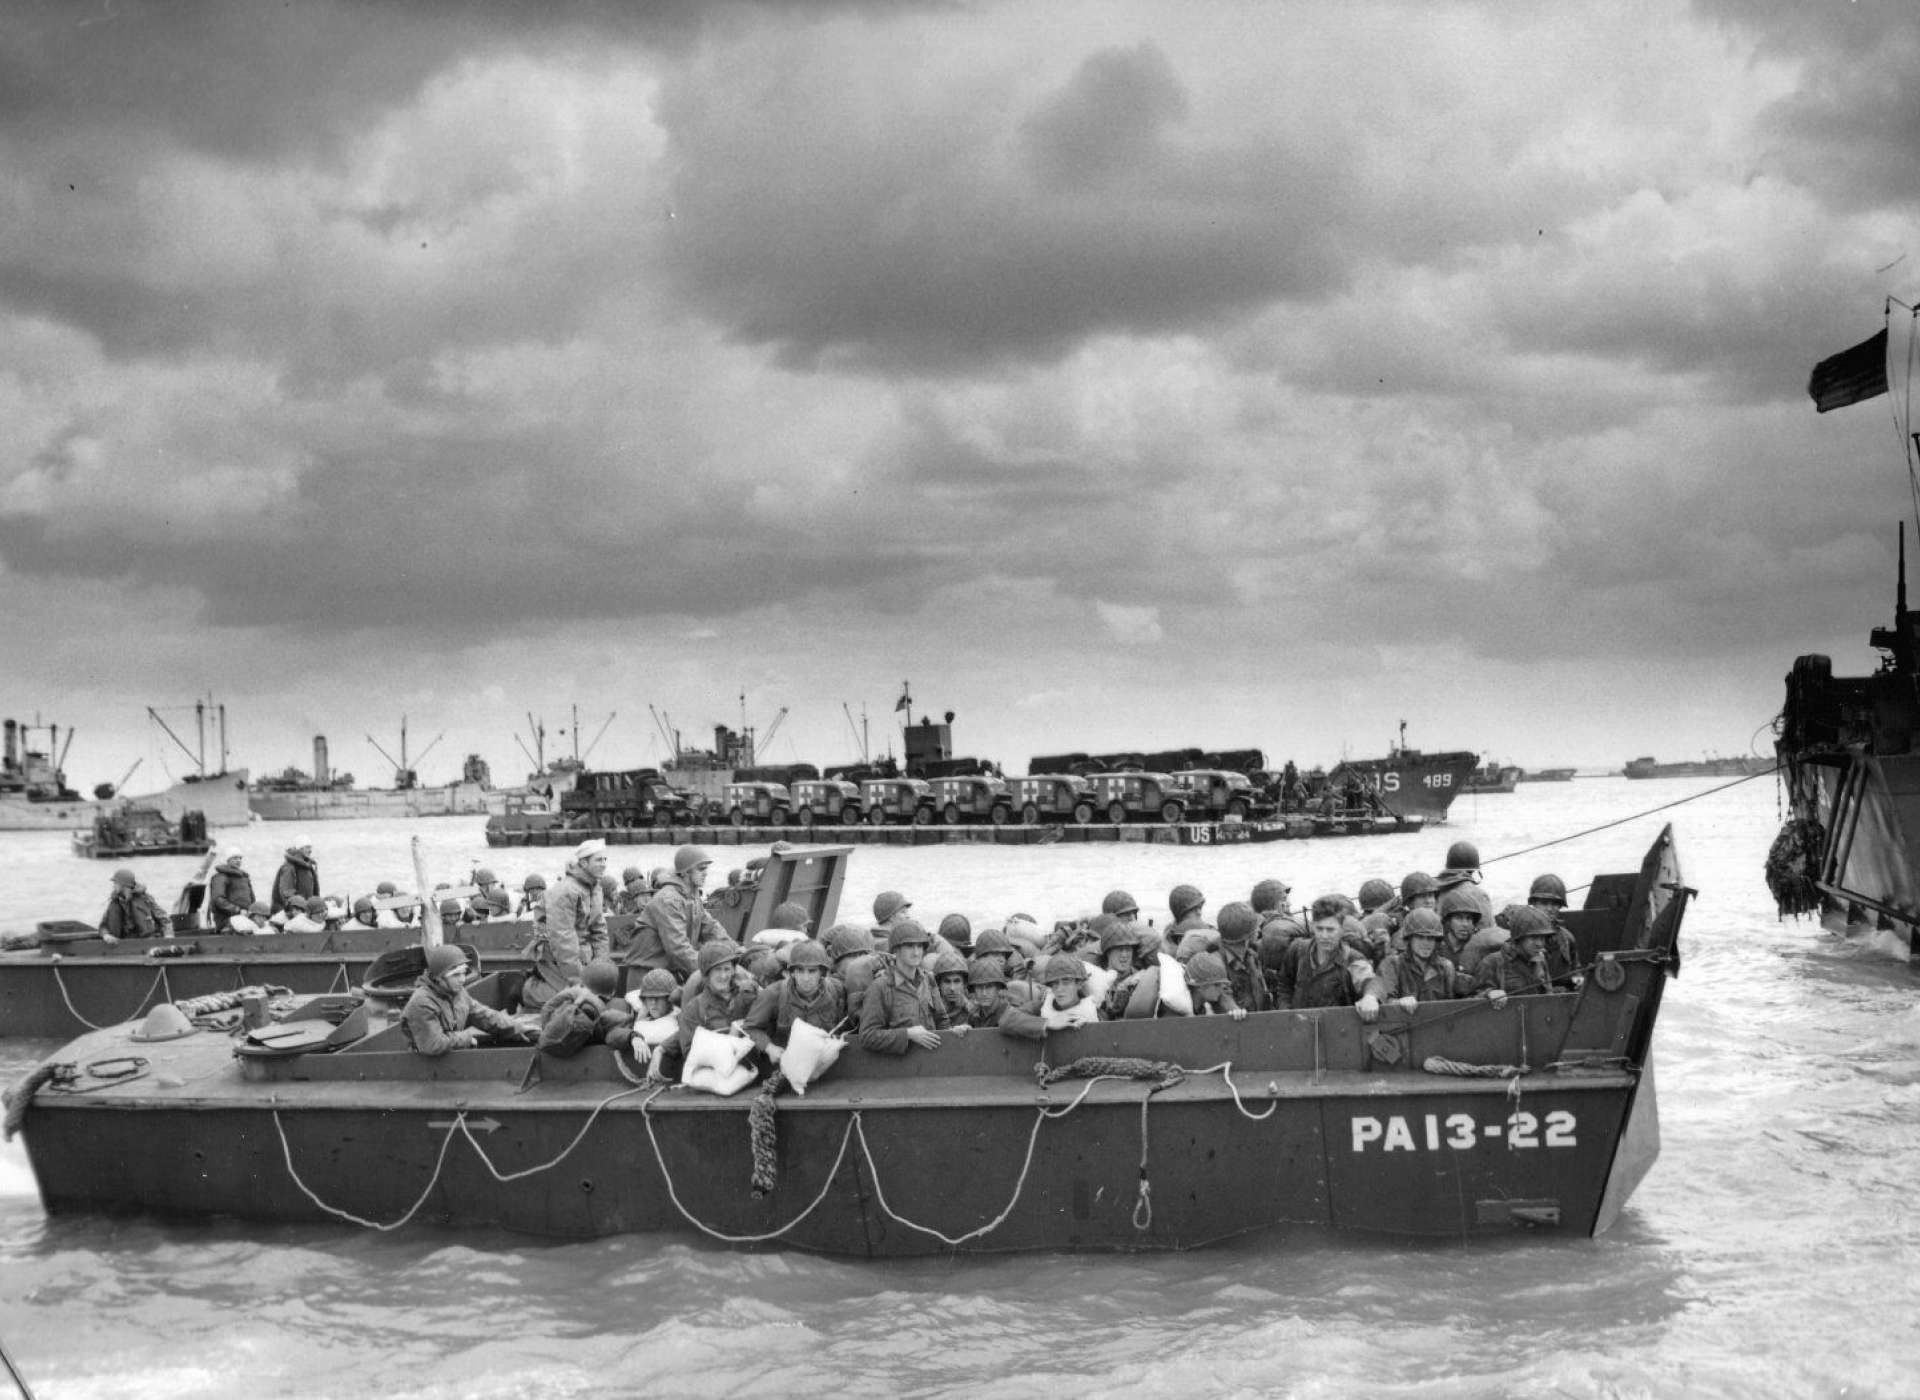 Higgins Boat LCVP at Normandy, photo courtesy of National Archives